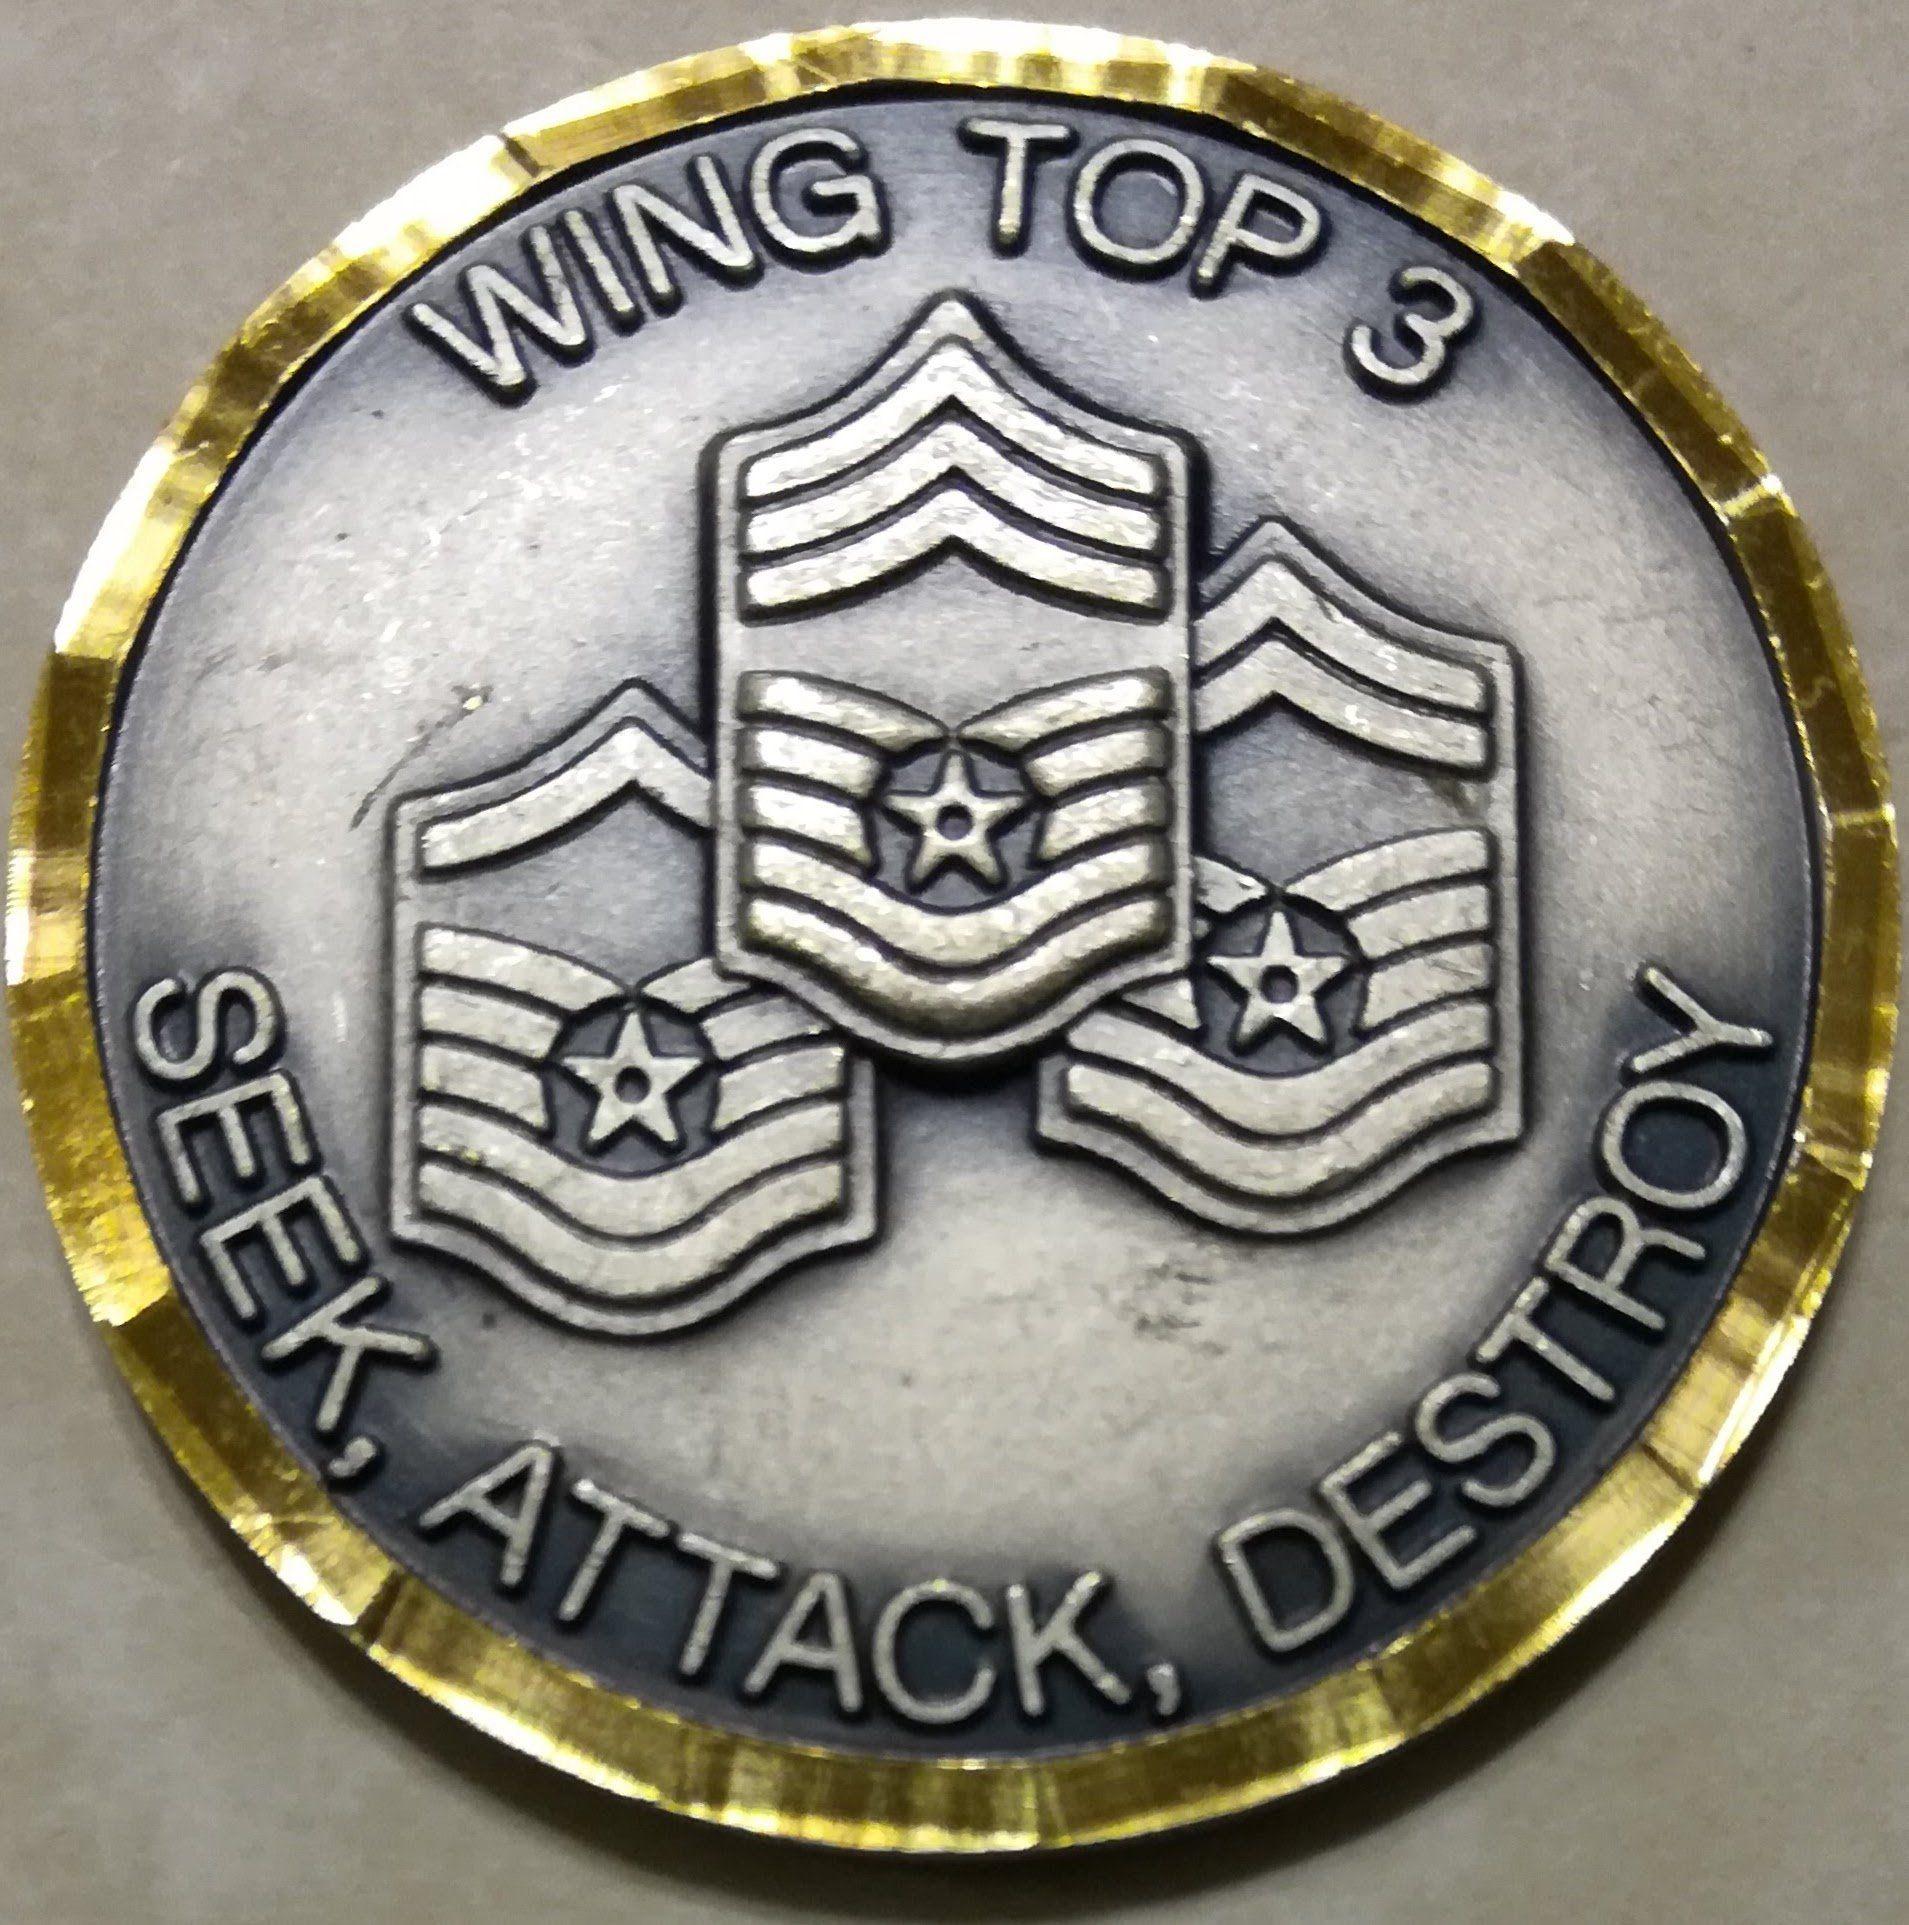 Top 3 Air Force Logo - 52nd Fighter Wing Spangdahlem Germany Top-3 Air Force Challenge Coin ...